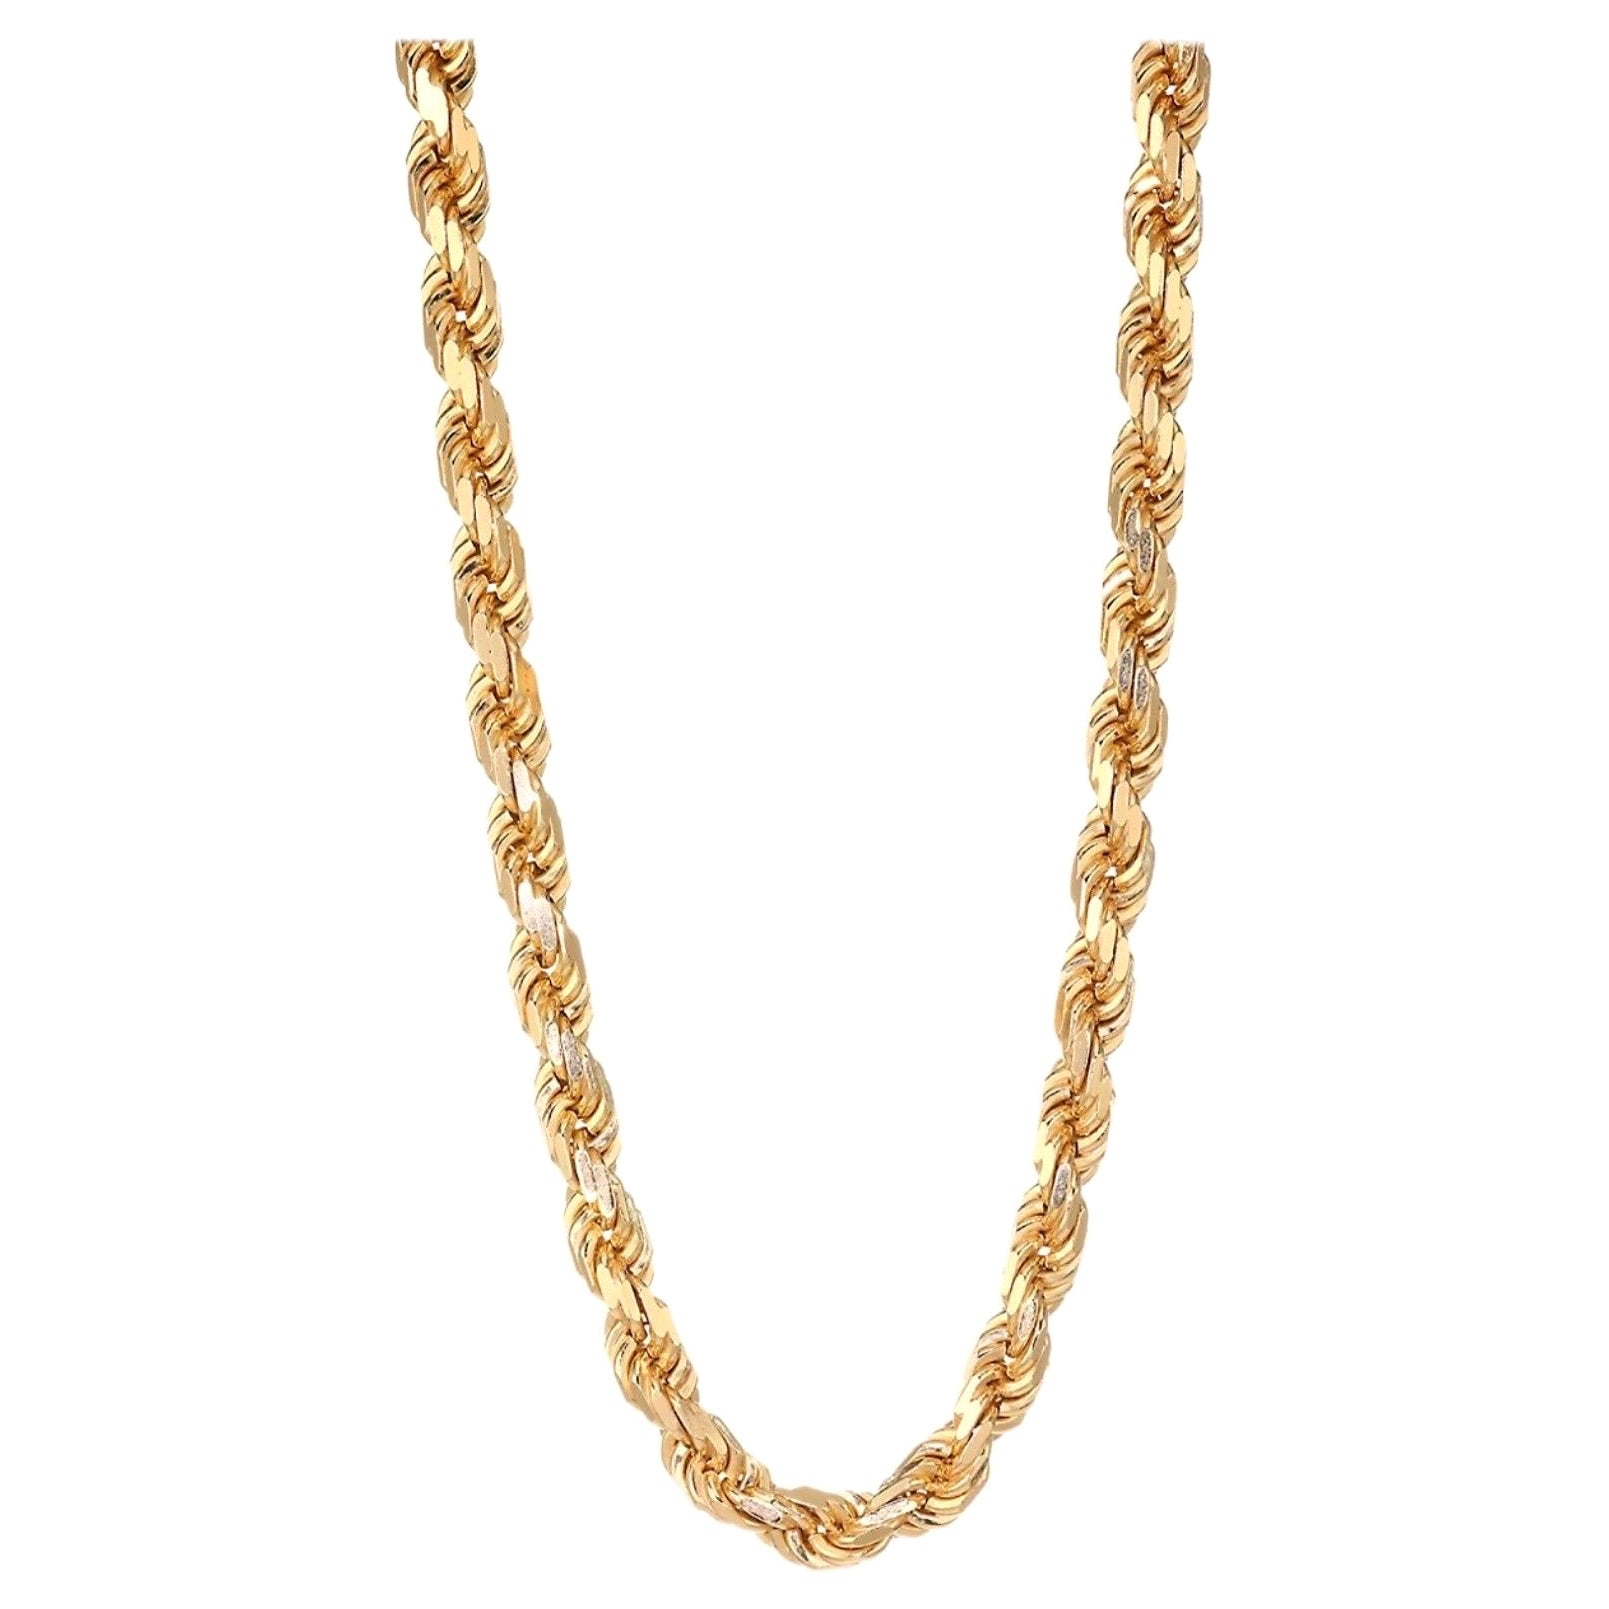 Vintage 14 Karat Yellow Gold 8.3 Gm, Rope Chain Necklace, 22